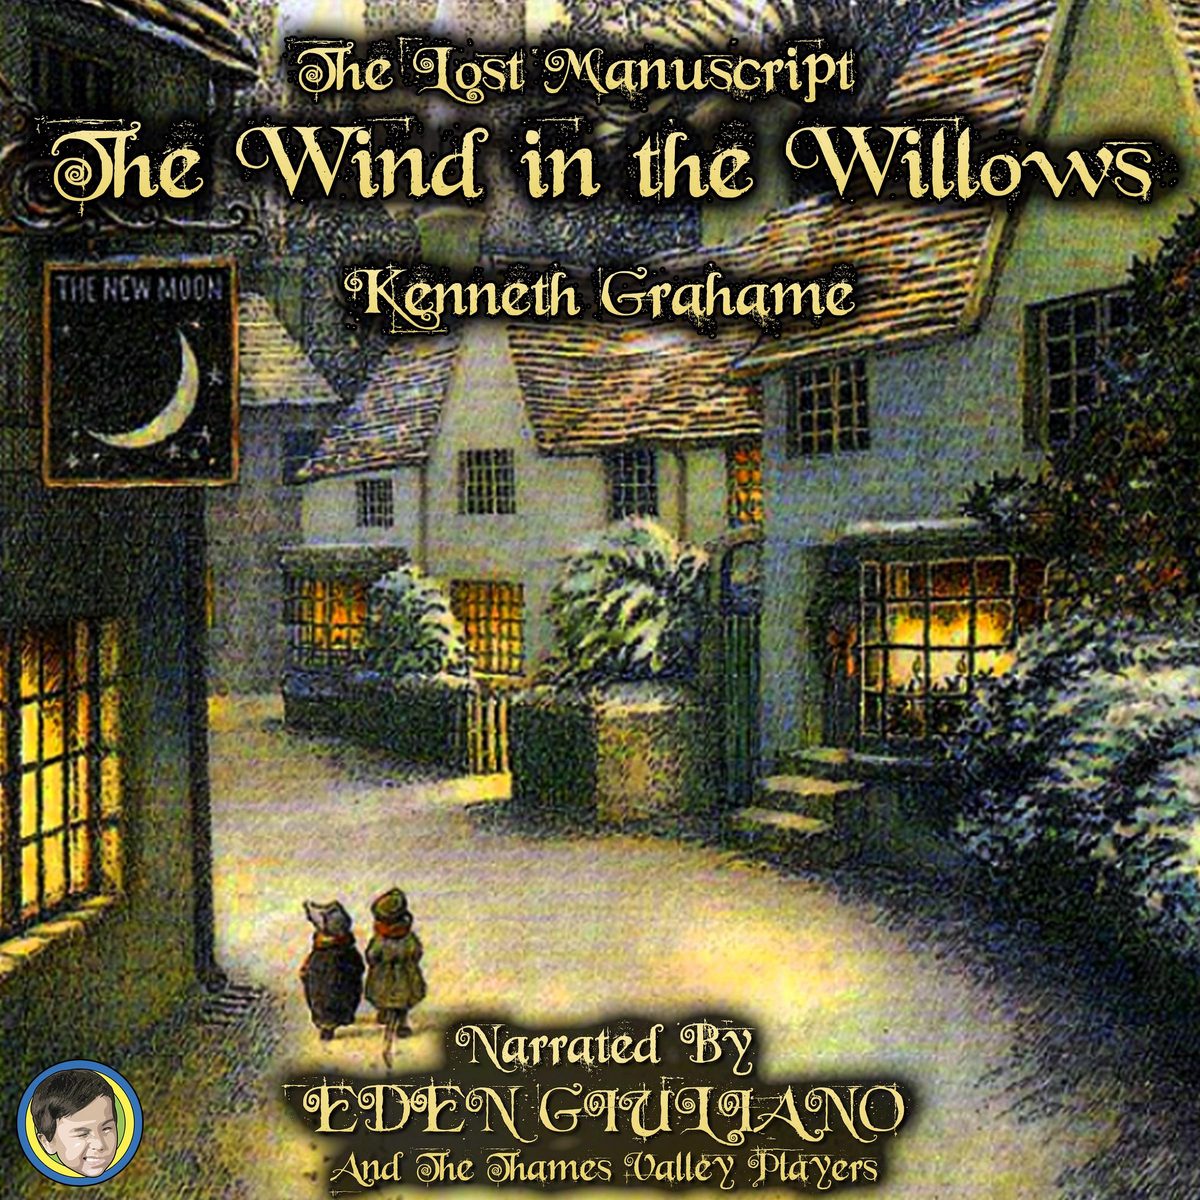 The Lost Manuscript The Wind in the Willows